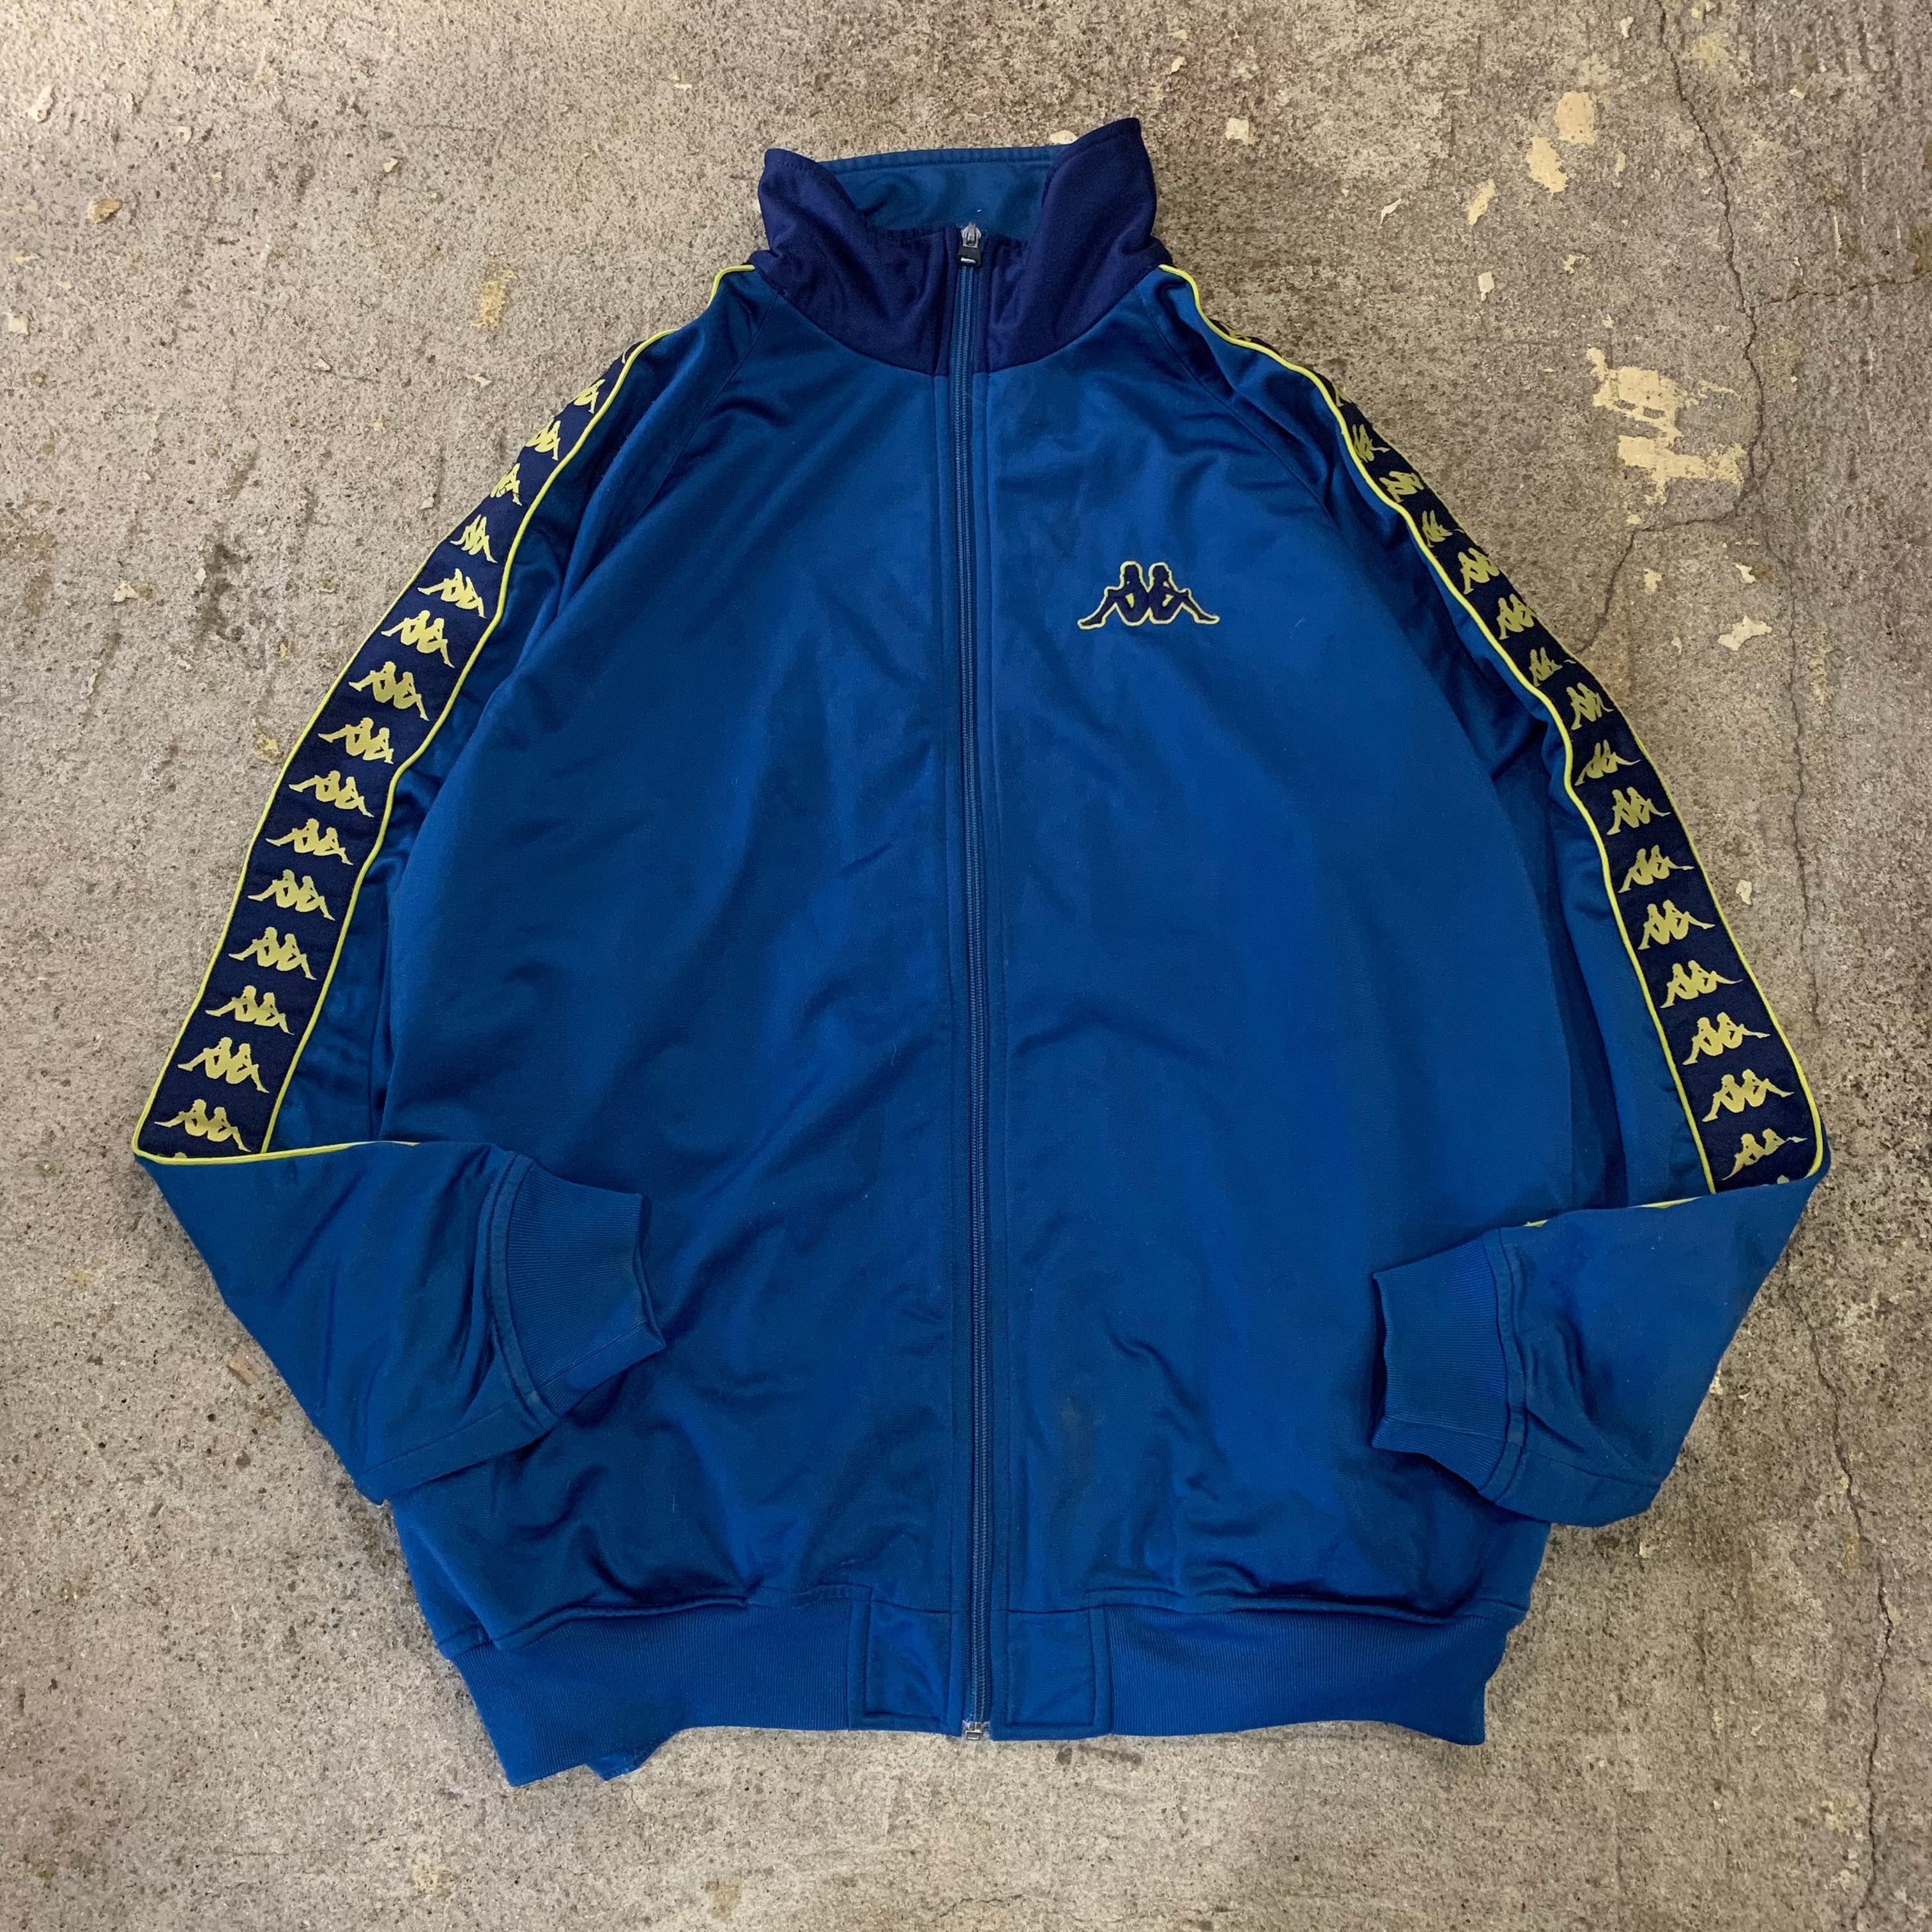 90s KAPPA track jacket | What’z up powered by BASE